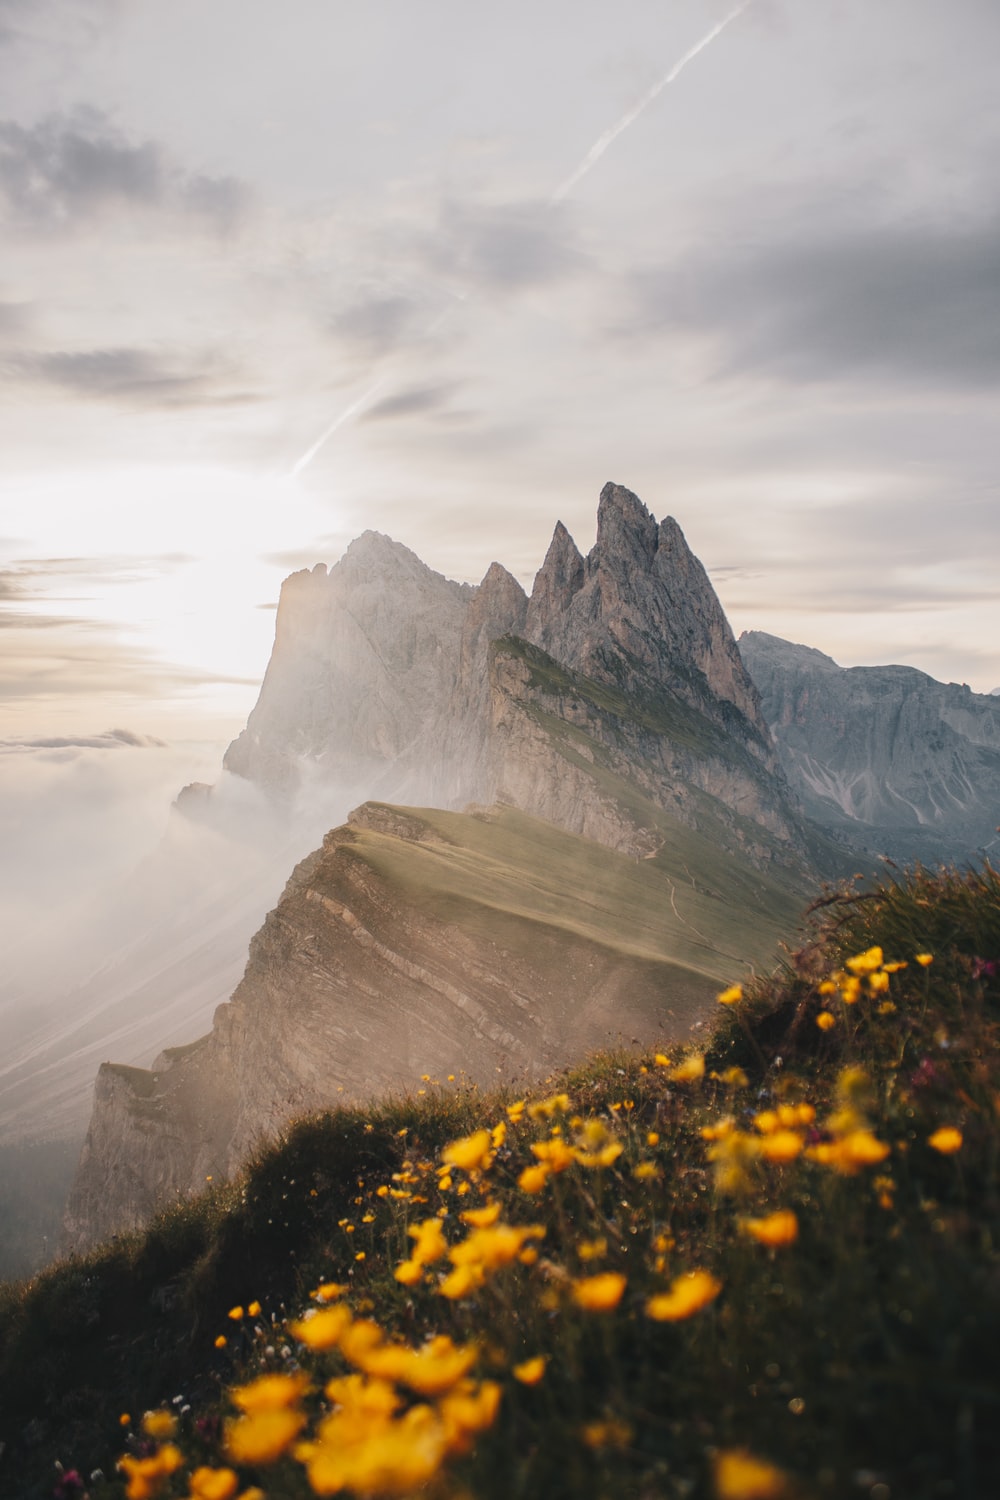 Dolomites Mountains Wallpapers